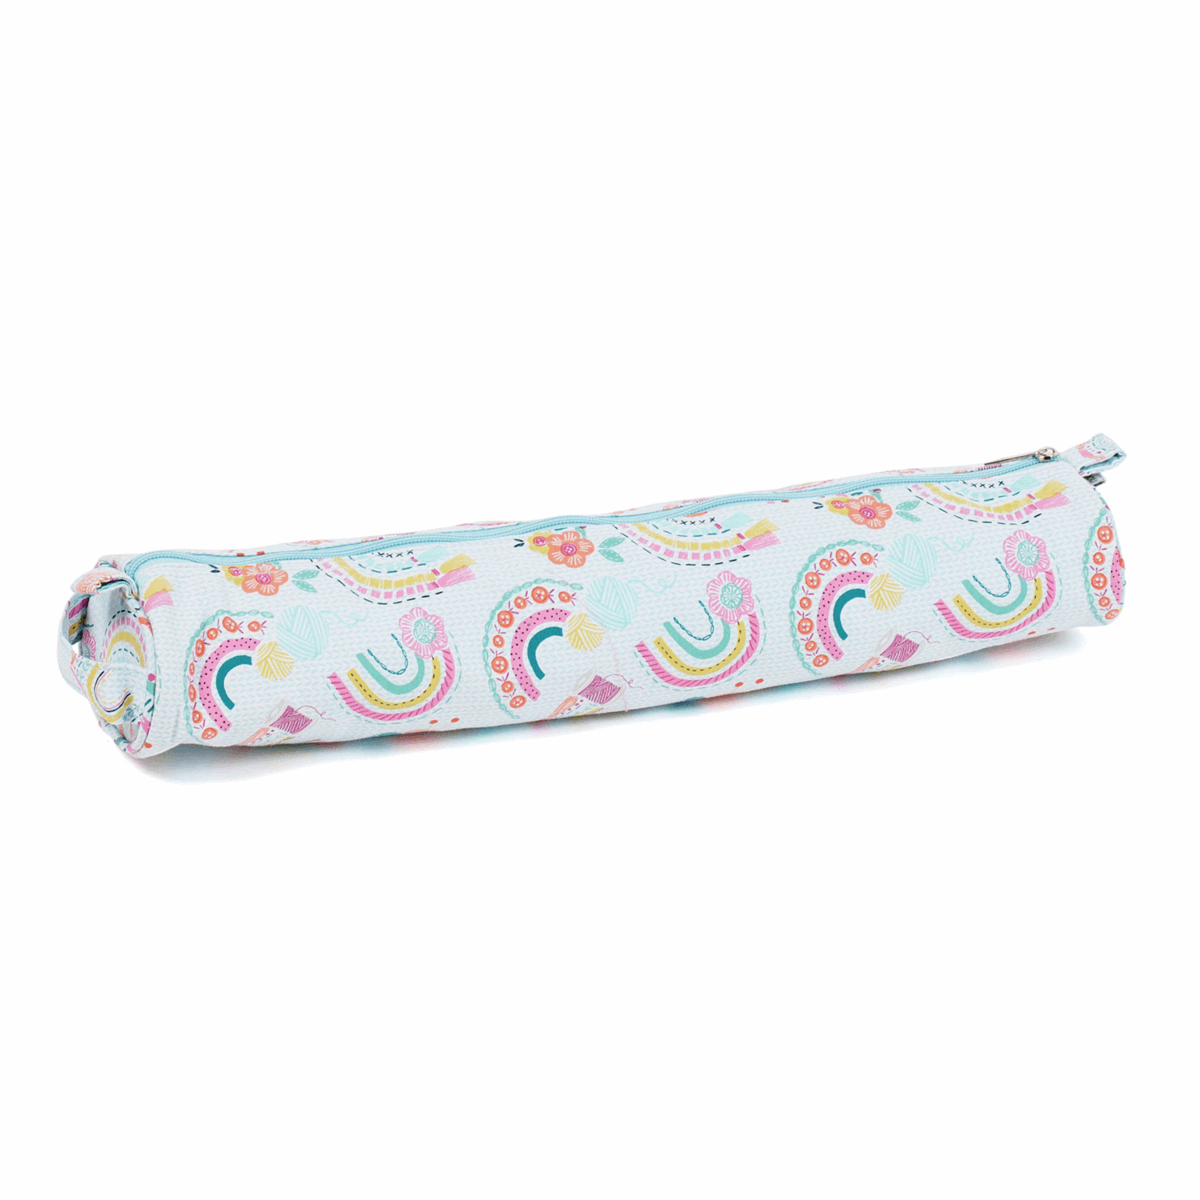 Knitting Needle Pin Bag Storage Case by Hobby Gift Various Designs 